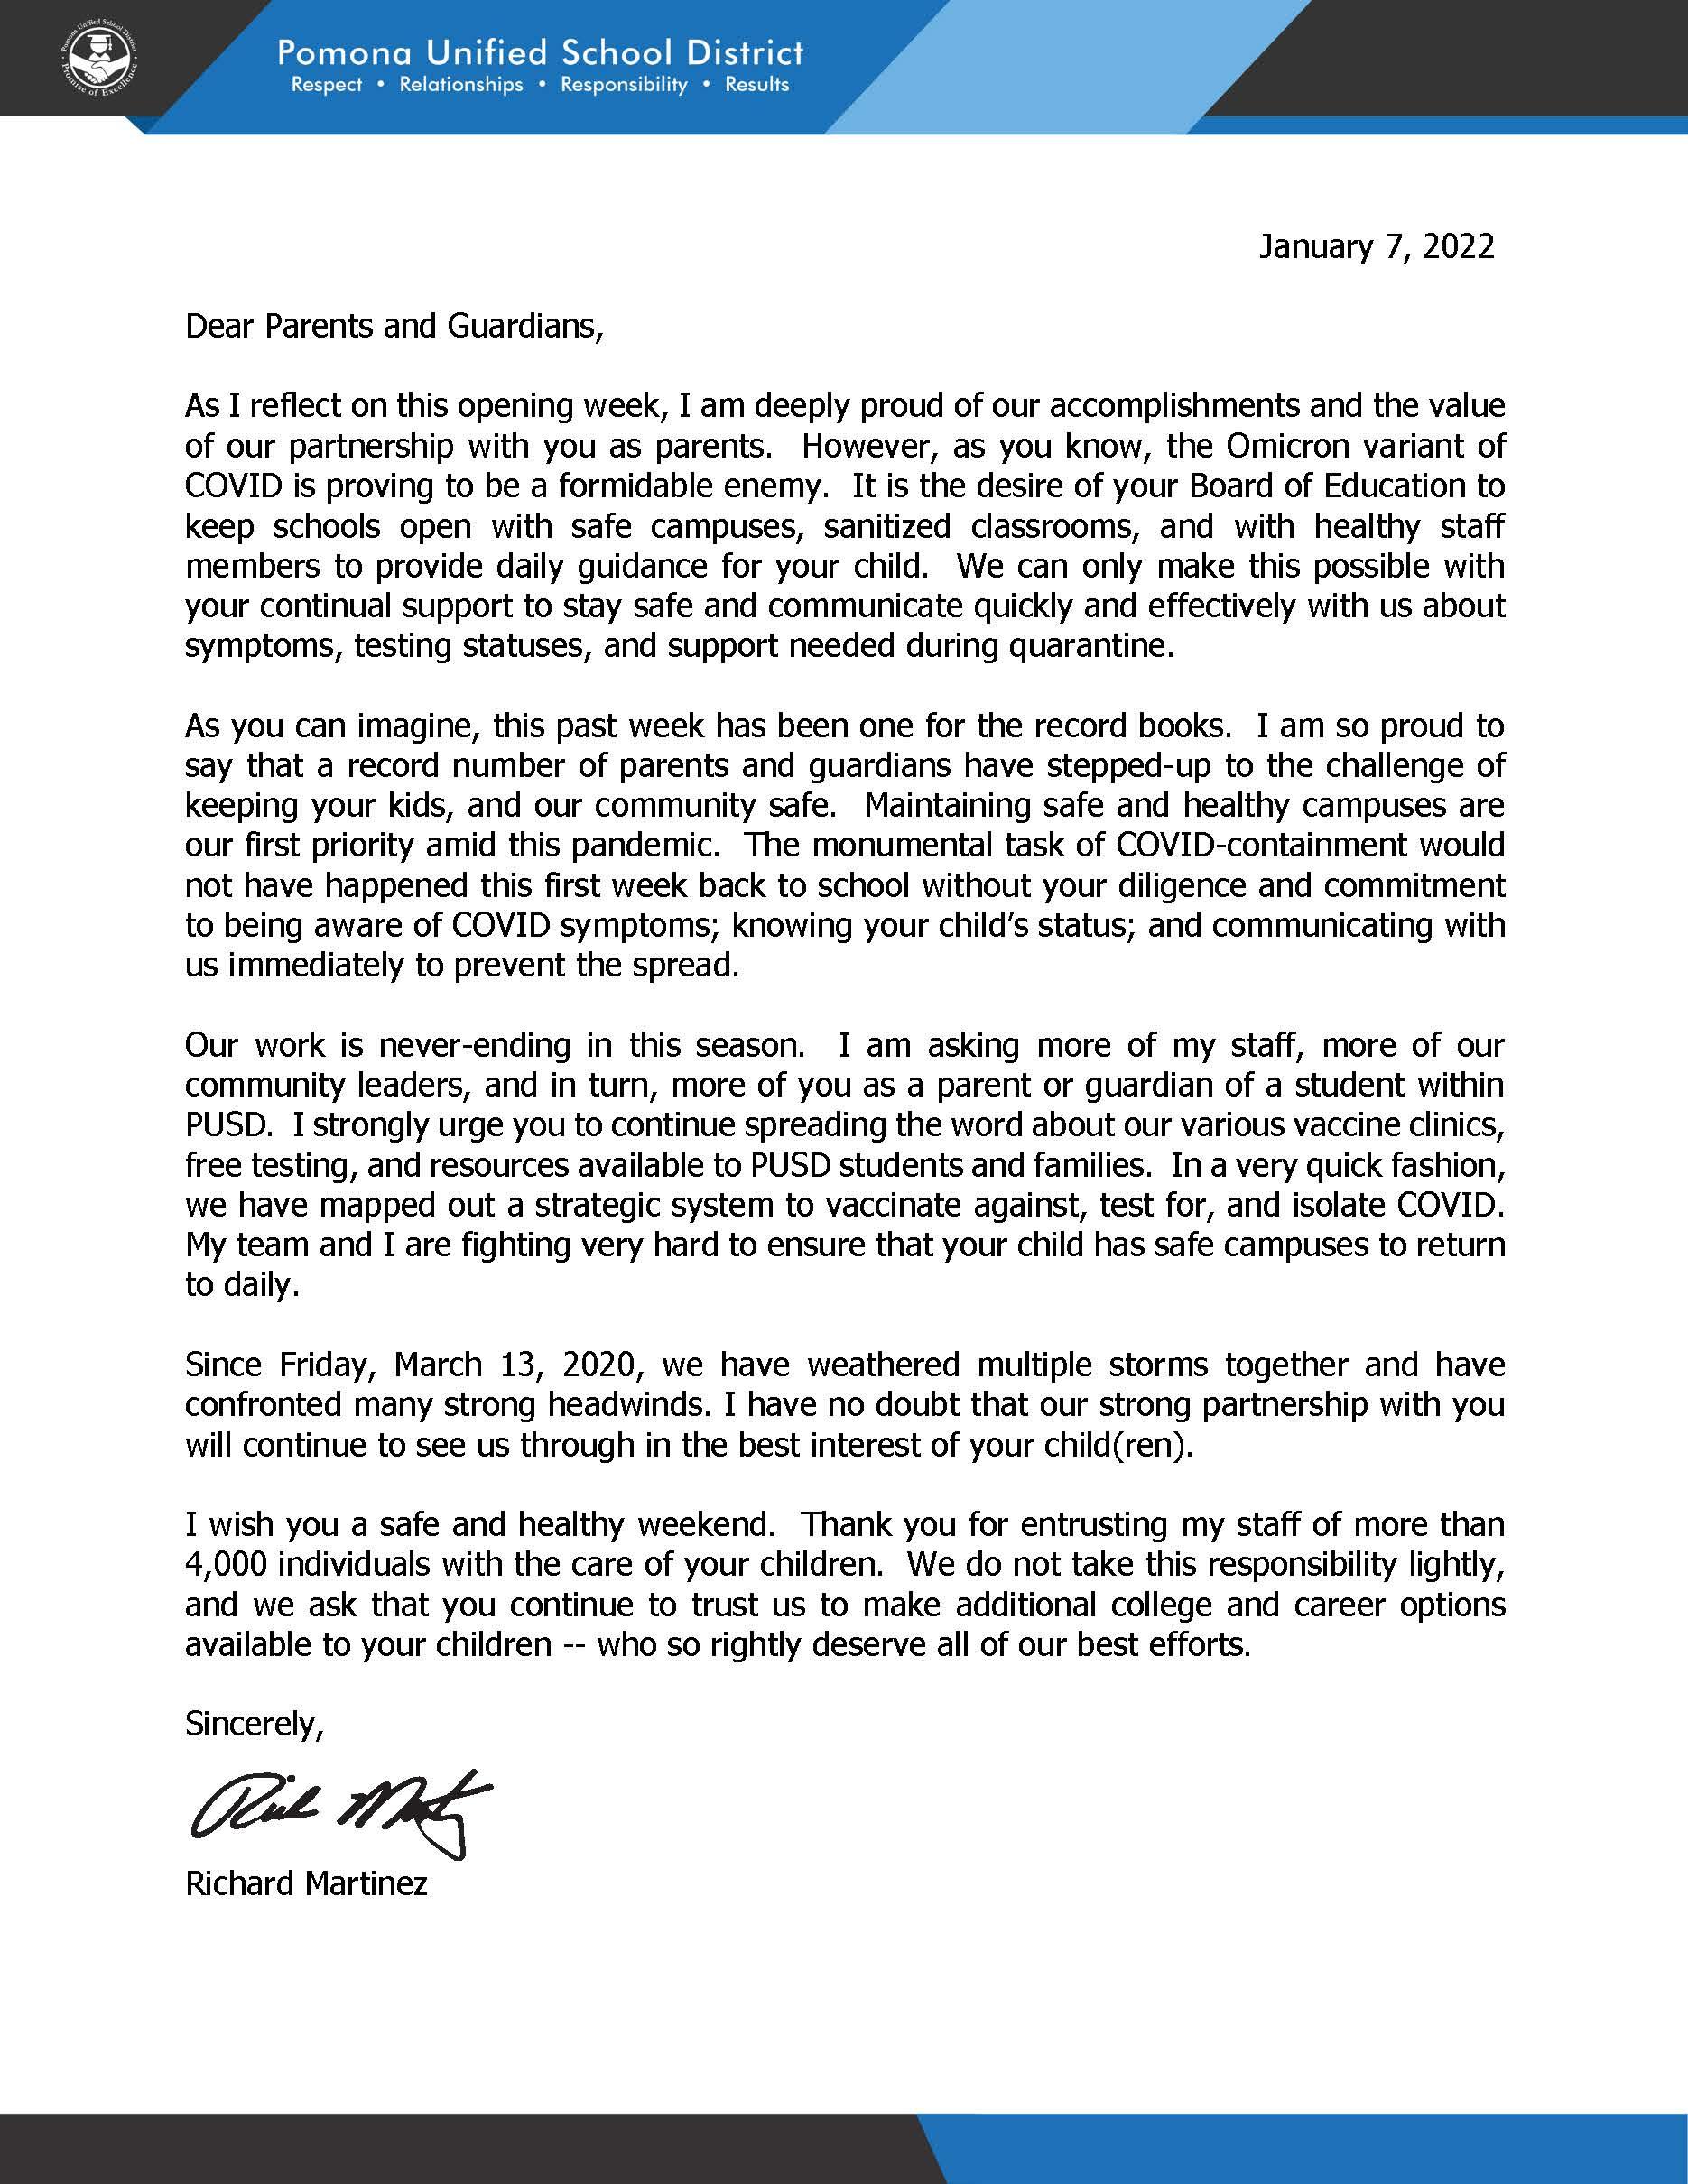 Supts letter to parents